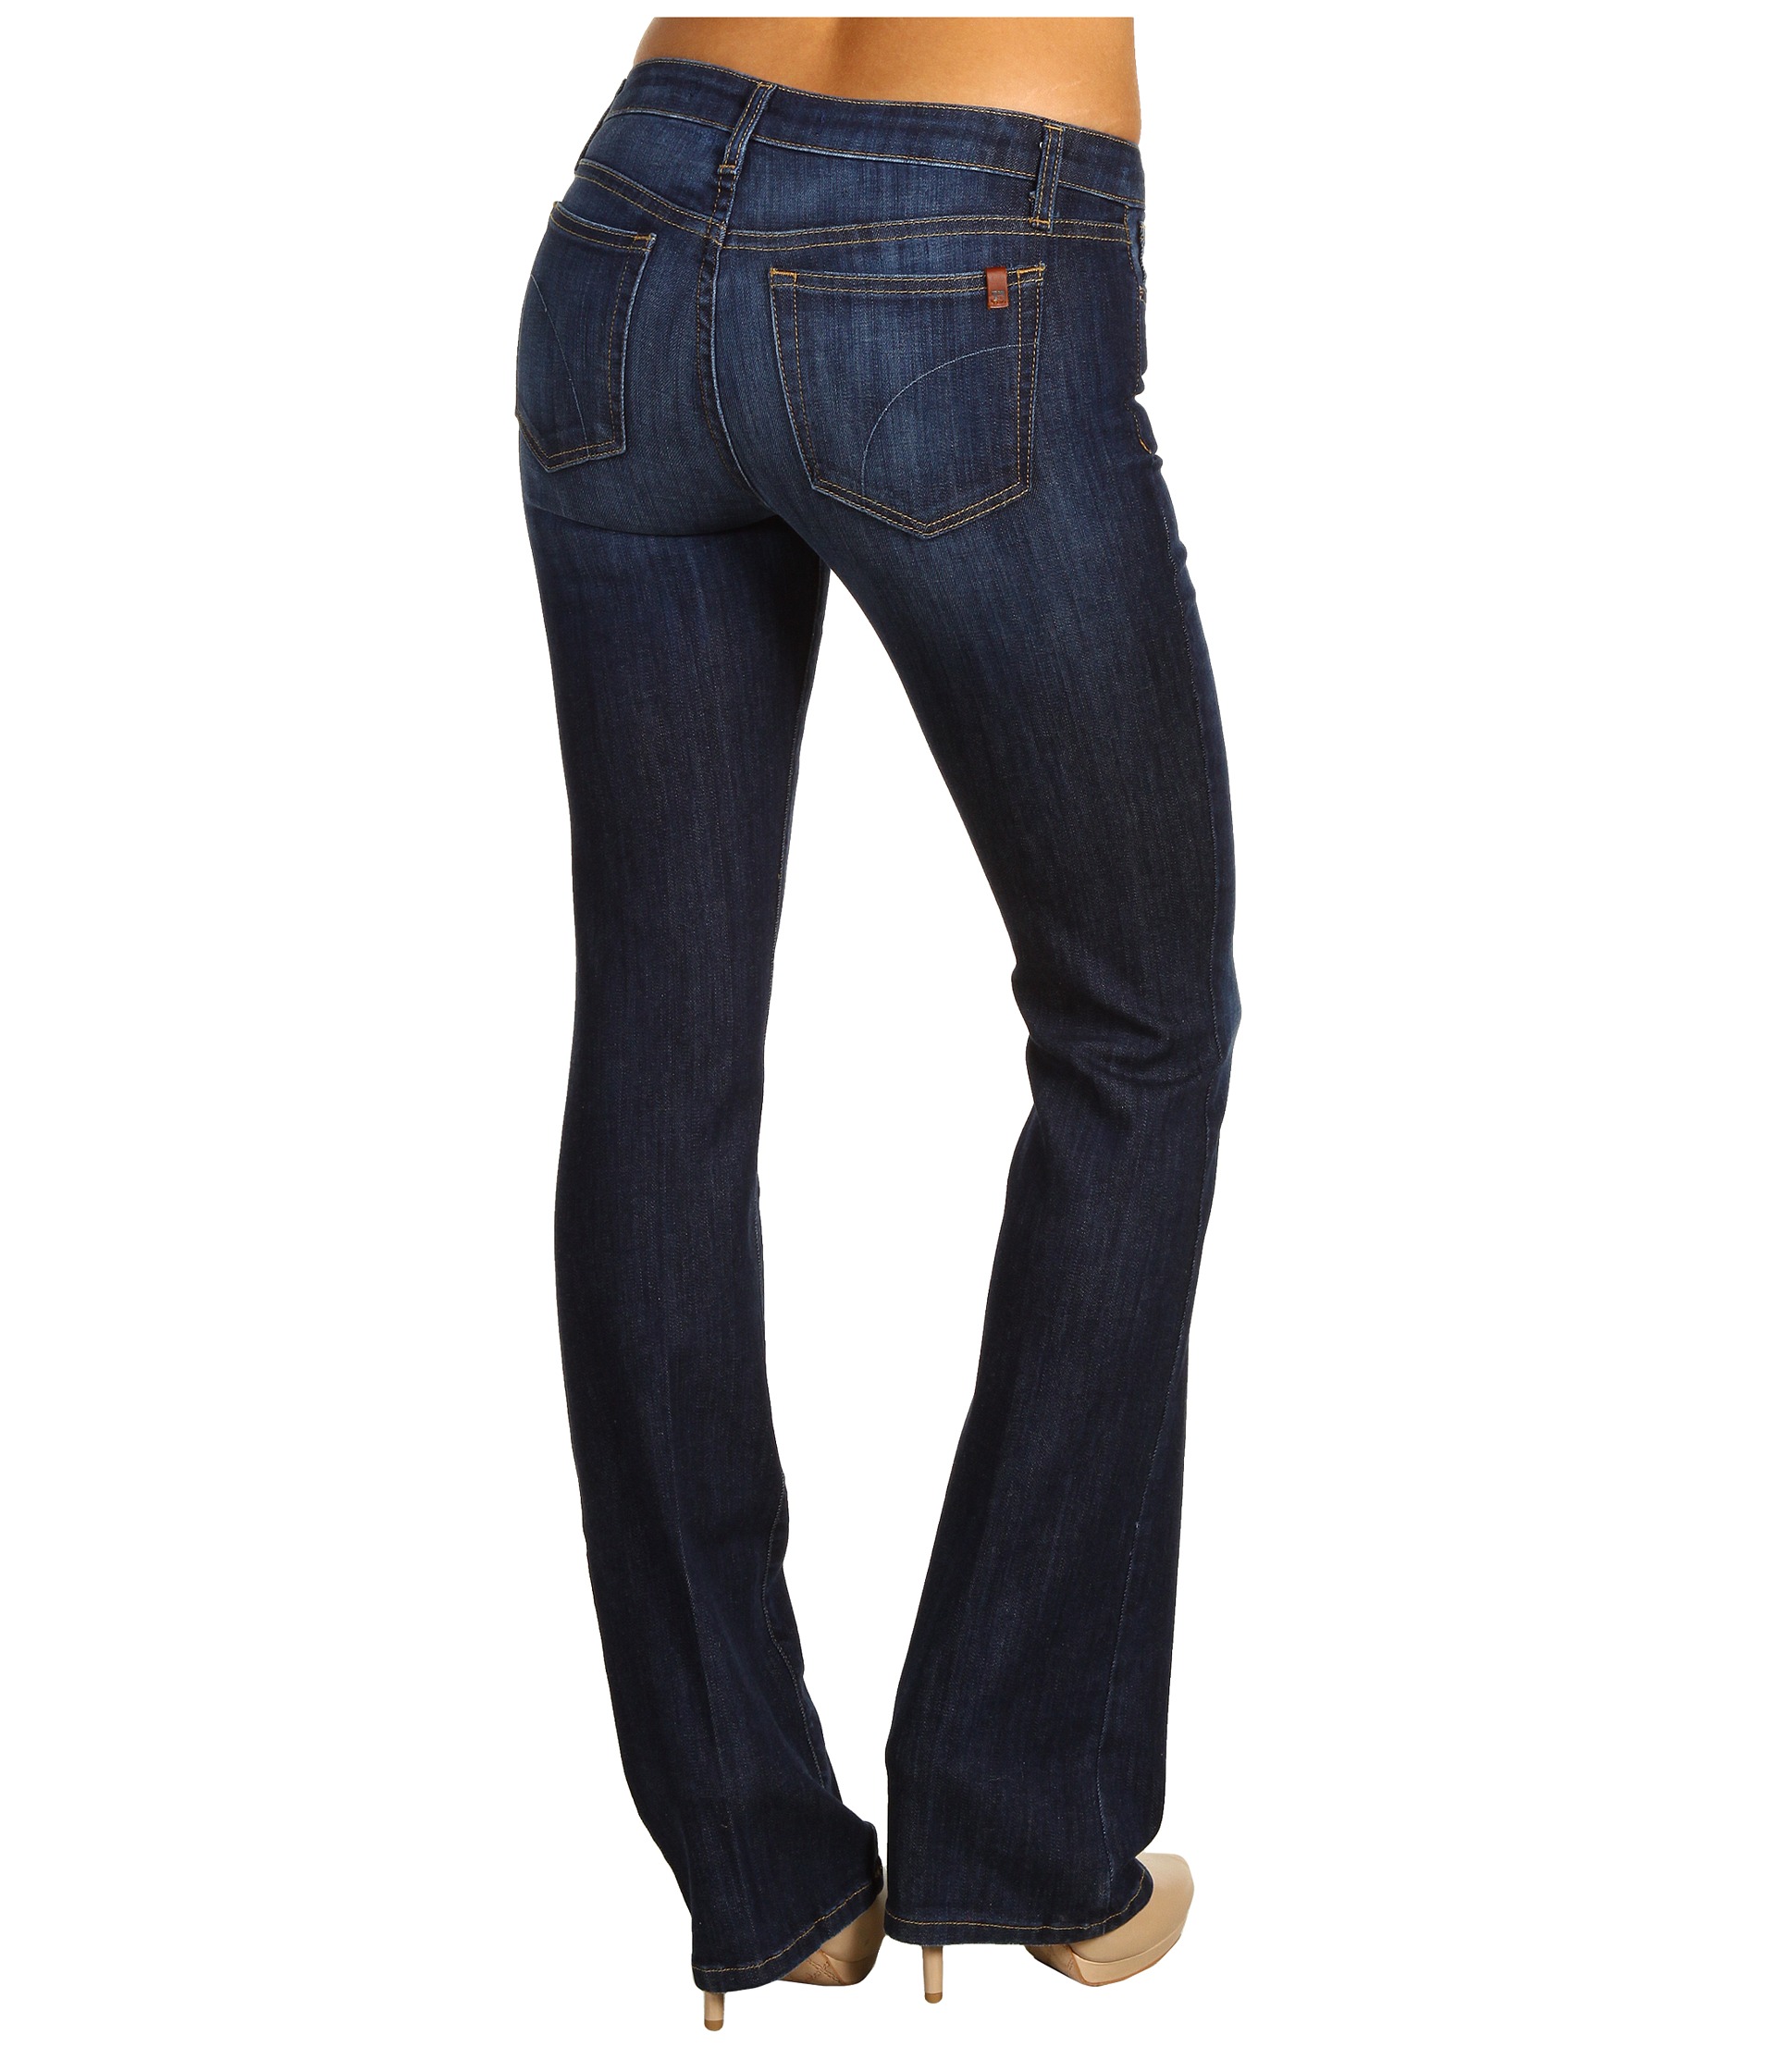 Joes Jeans Honey Curvy Fit in Mona    BOTH 